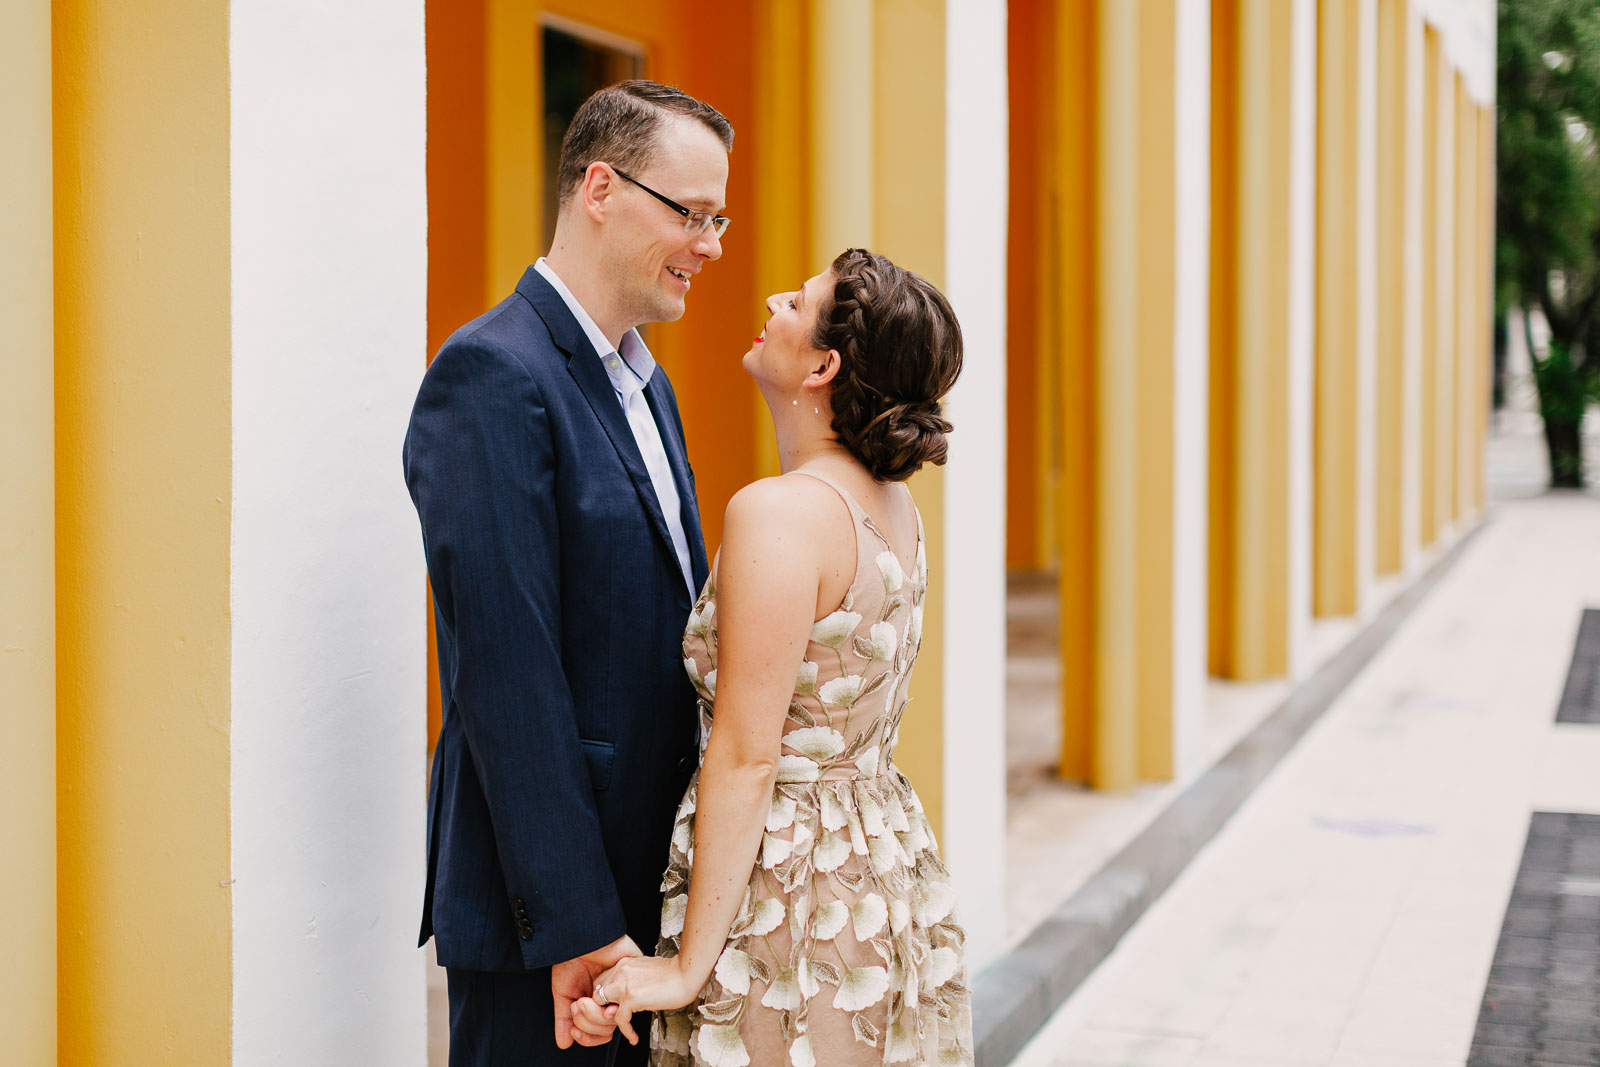 Modern Engagement Photography at The Miami Design District, FL – LukasG